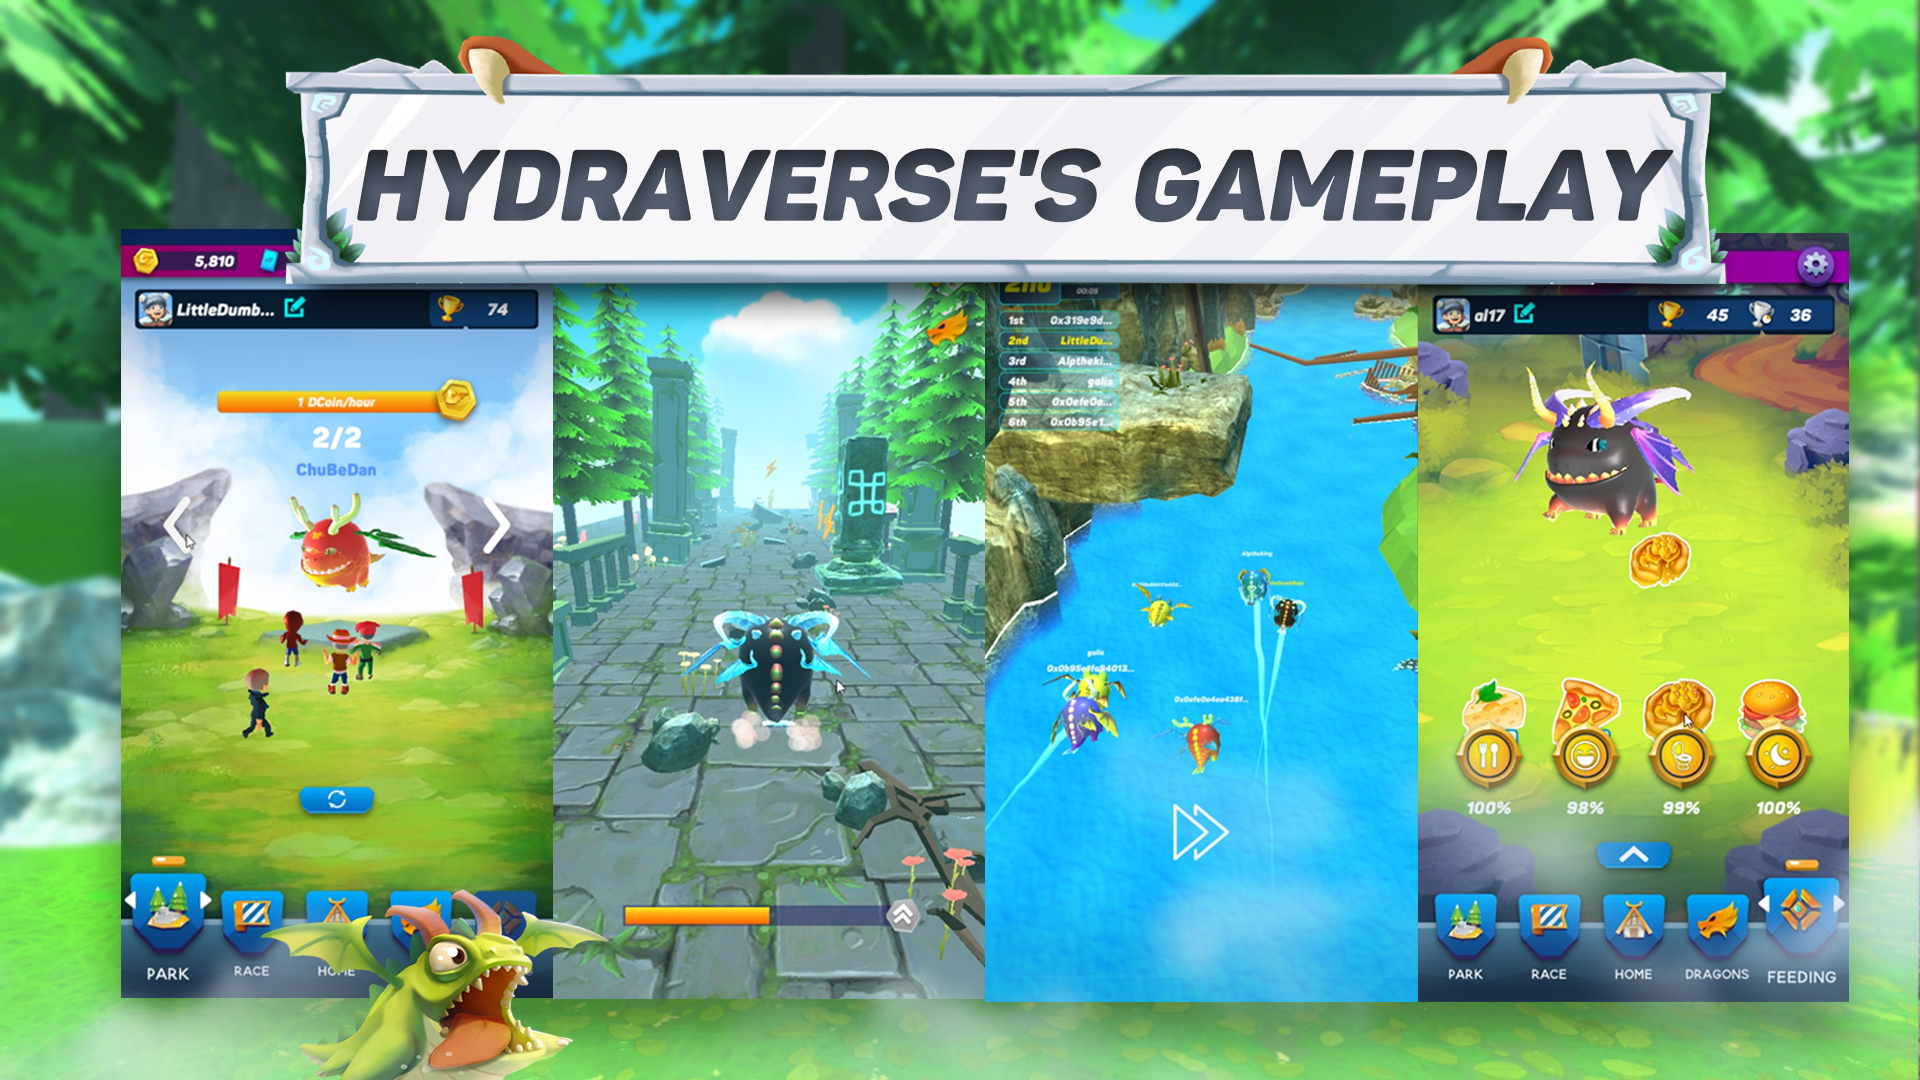 game image from HydraVerse